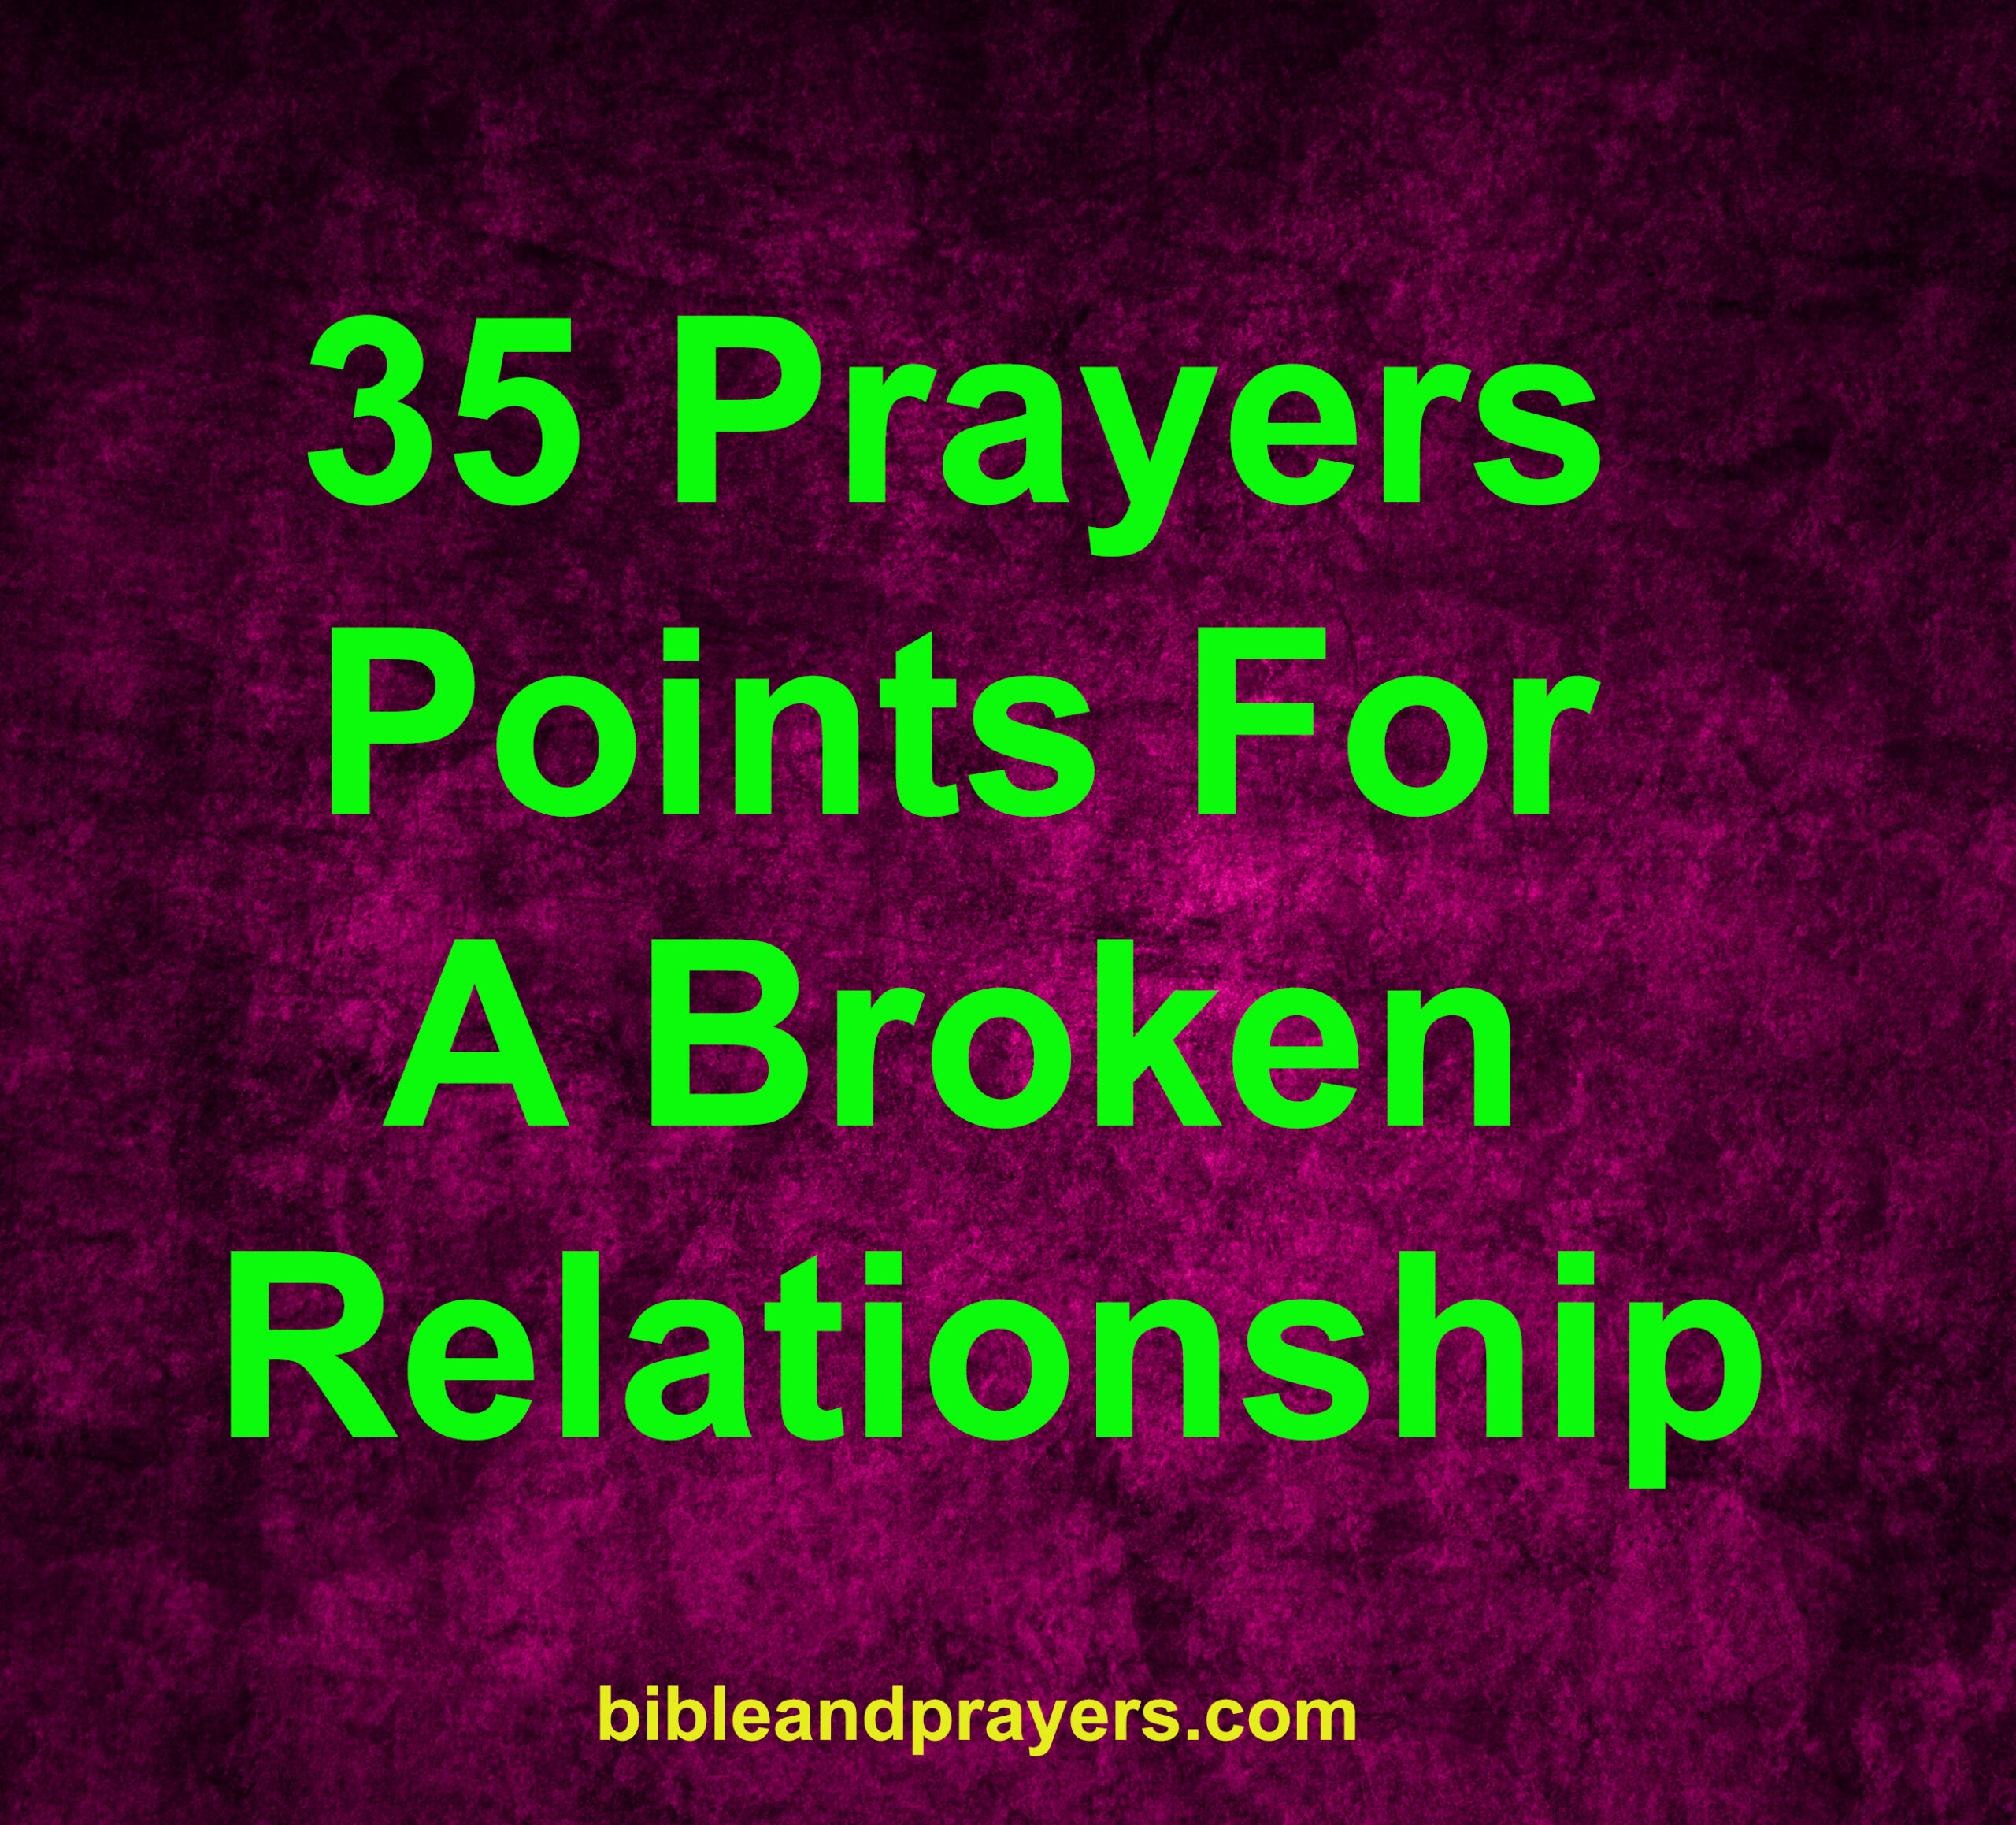 35 Prayers Points For A Broken Relationship